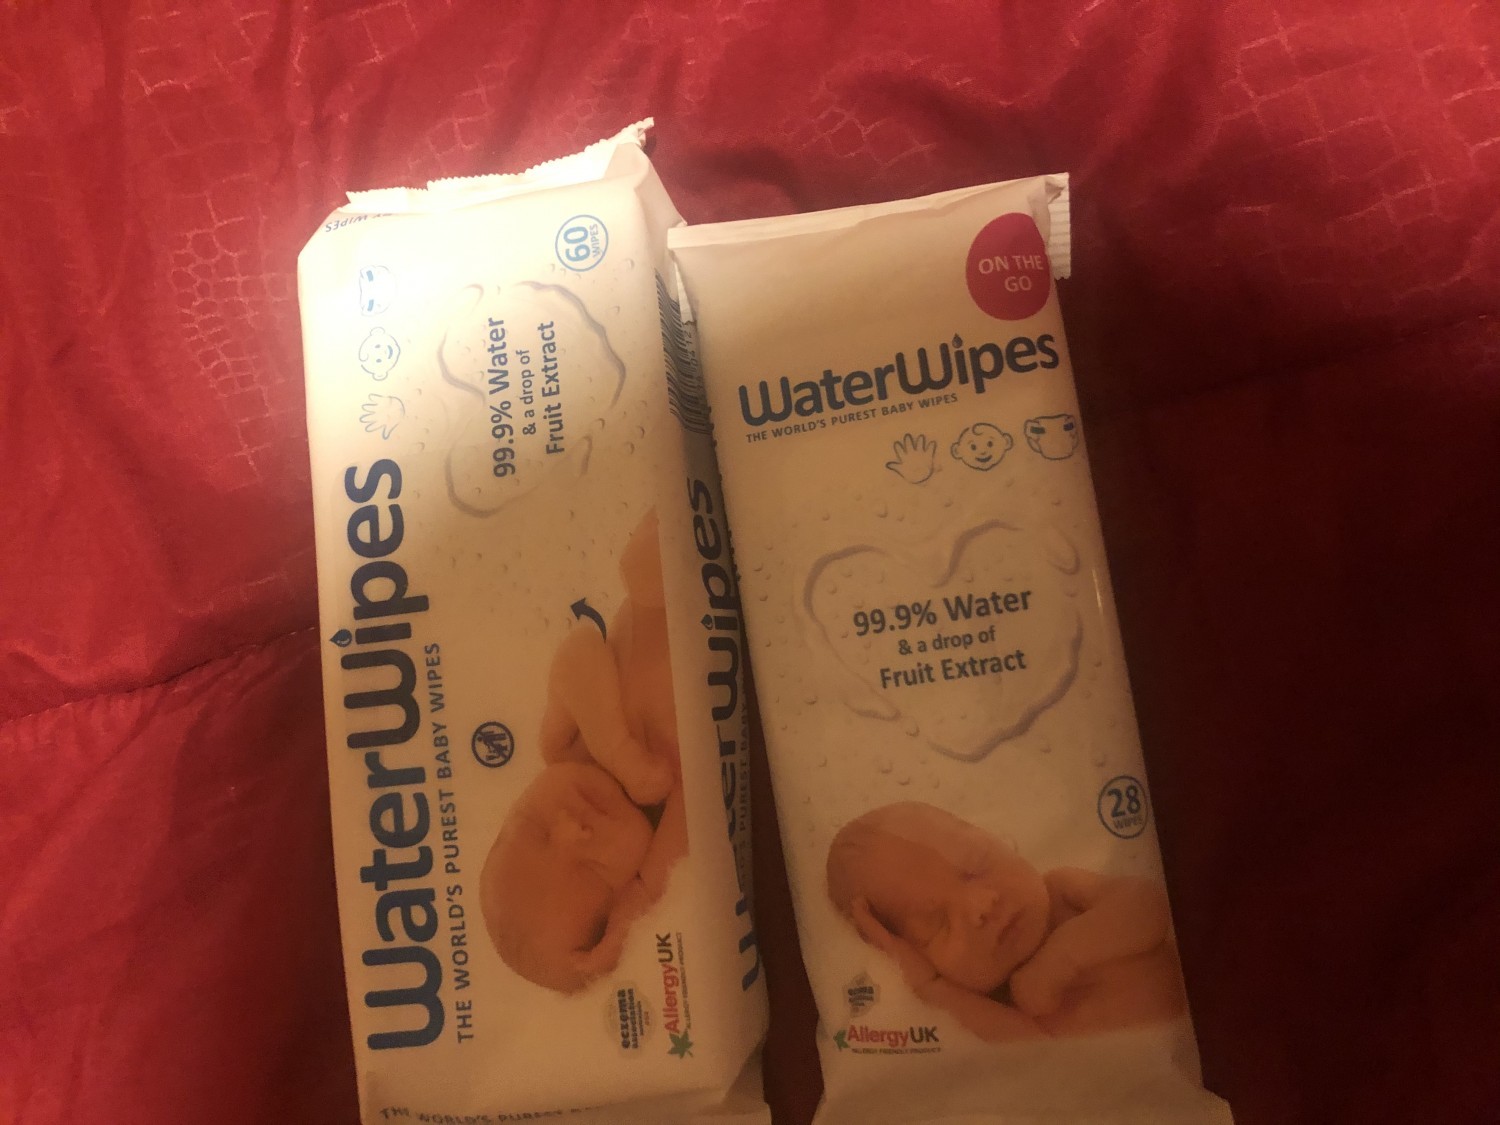 Water wipes